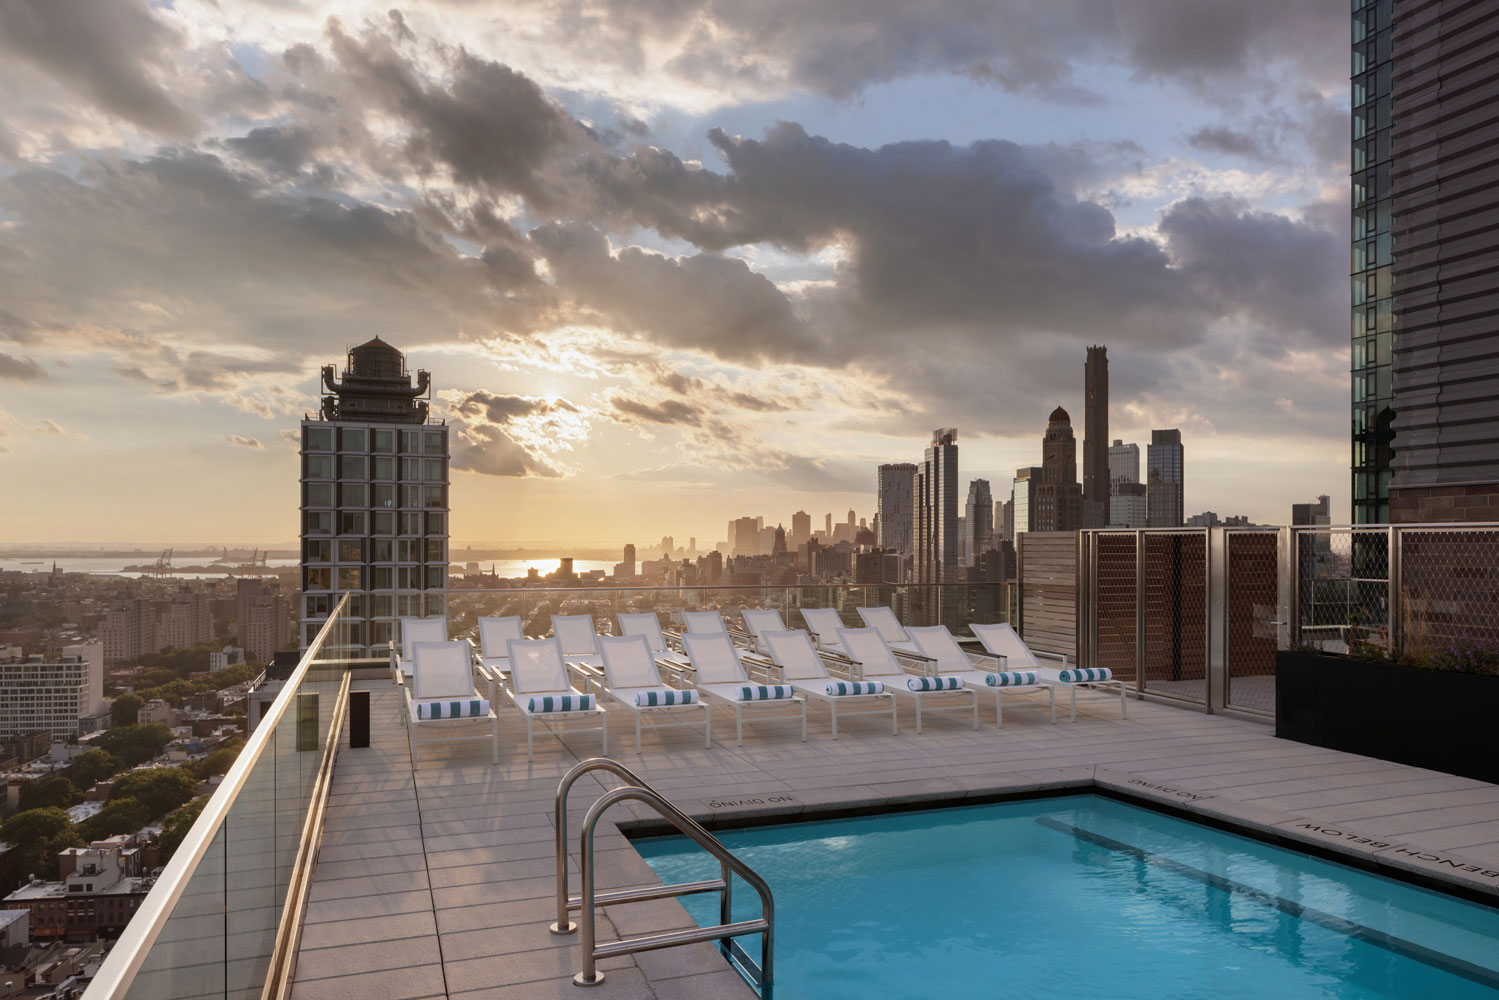 Plank Road rooftop amenity space with swimming pool at sunset